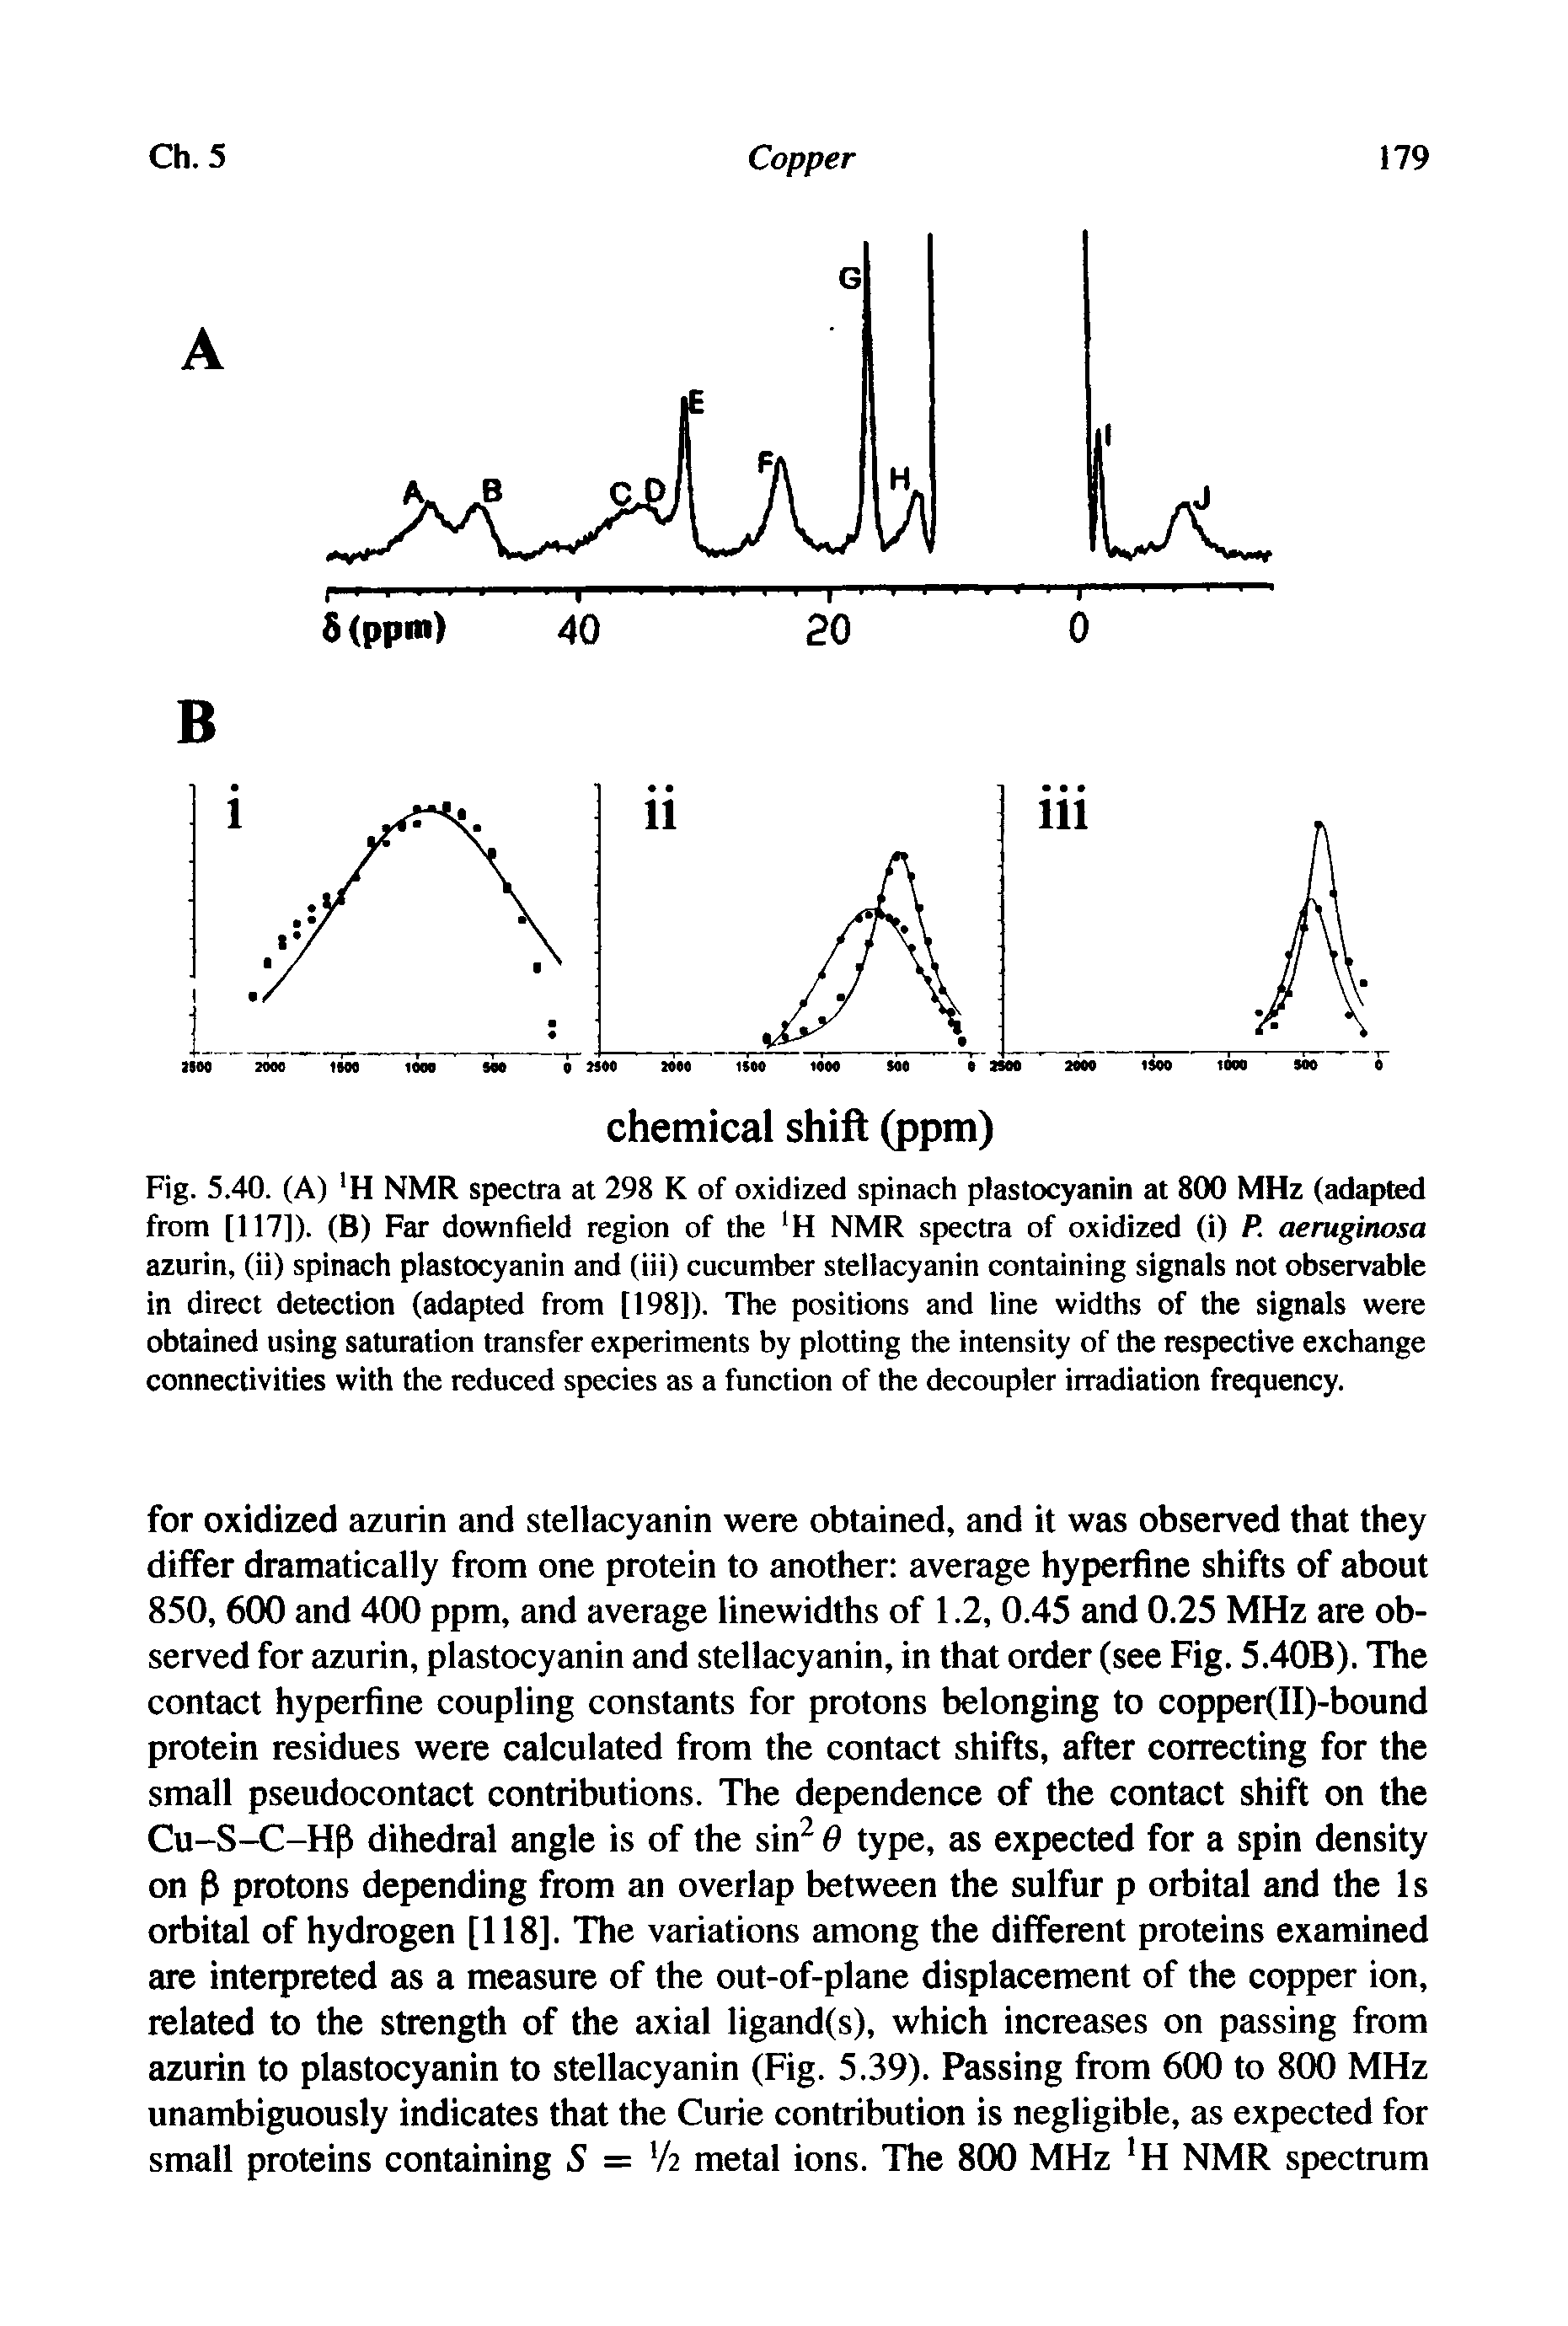 Fig. 5.40. (A) H NMR spectra at 298 K of oxidized spinach plastocyanin at 800 MHz (adapted from [117]). (B) Far downfield region of the H NMR spectra of oxidized (i) P. aeruginosa azurin, (ii) spinach plastocyanin and (iii) cucumber stellacyanin containing signals not observable in direct detection (adapted from [198]). The positions and line widths of the signals were obtained using saturation transfer experiments by plotting the intensity of the respective exchange connectivities with the reduced species as a function of the decoupler irradiation frequency.